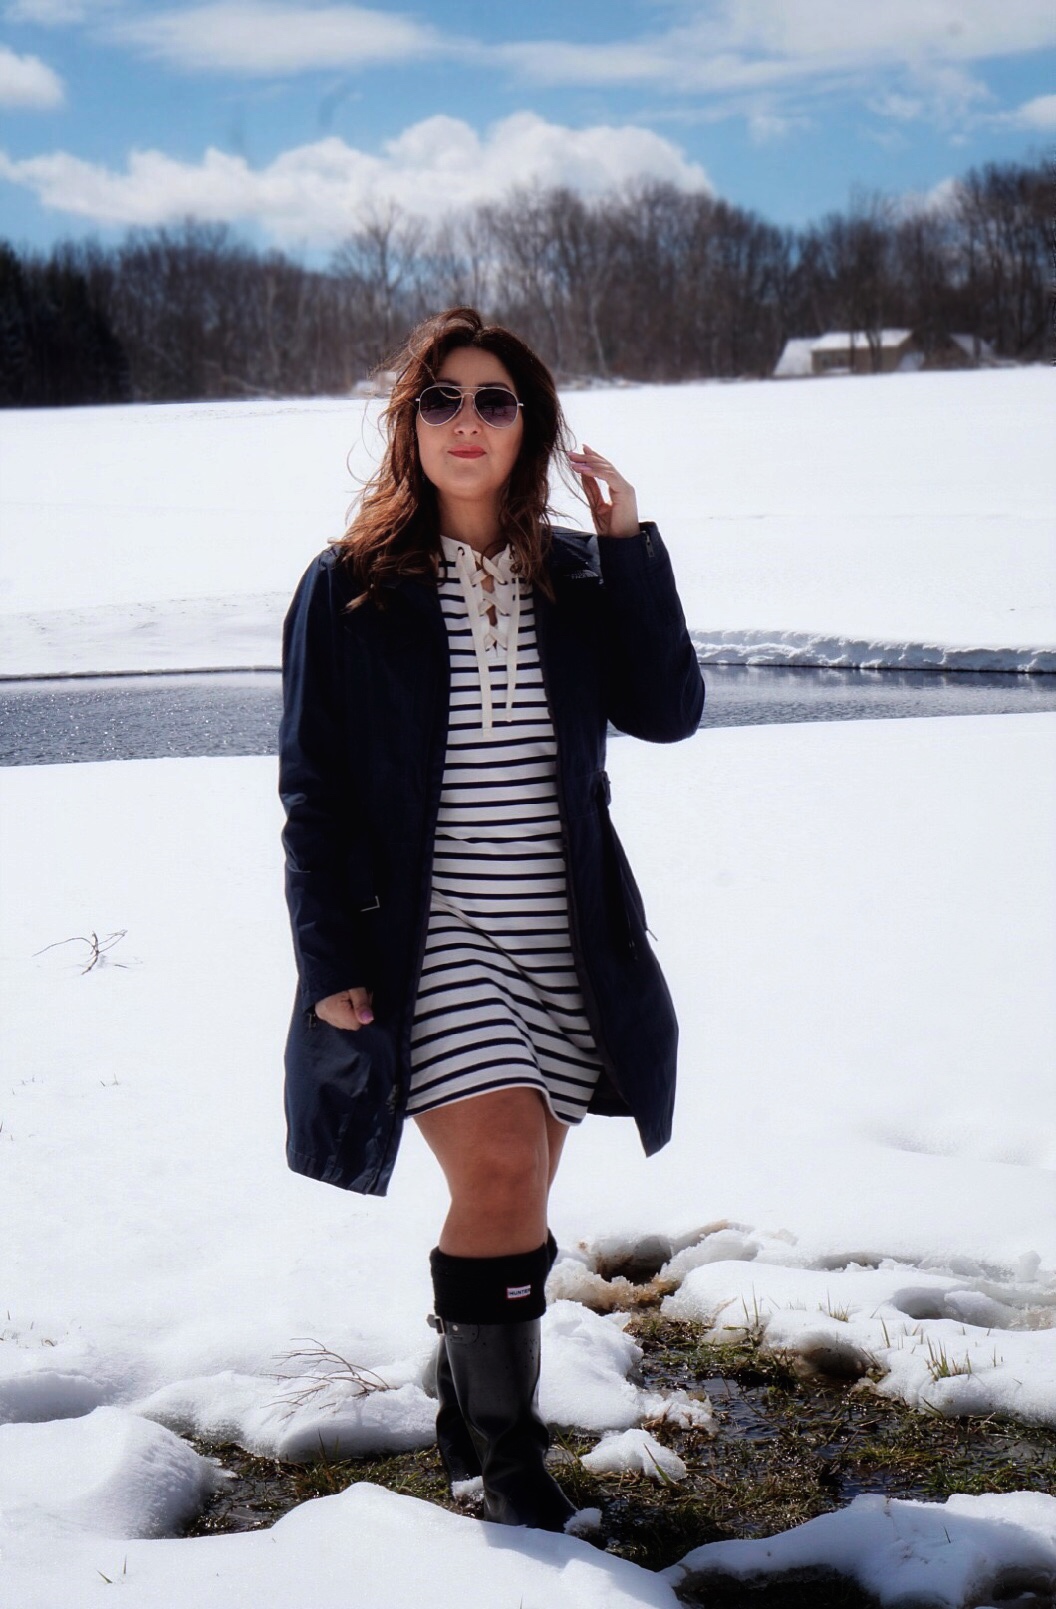 Winter fun with dress and boots. @oldnavy